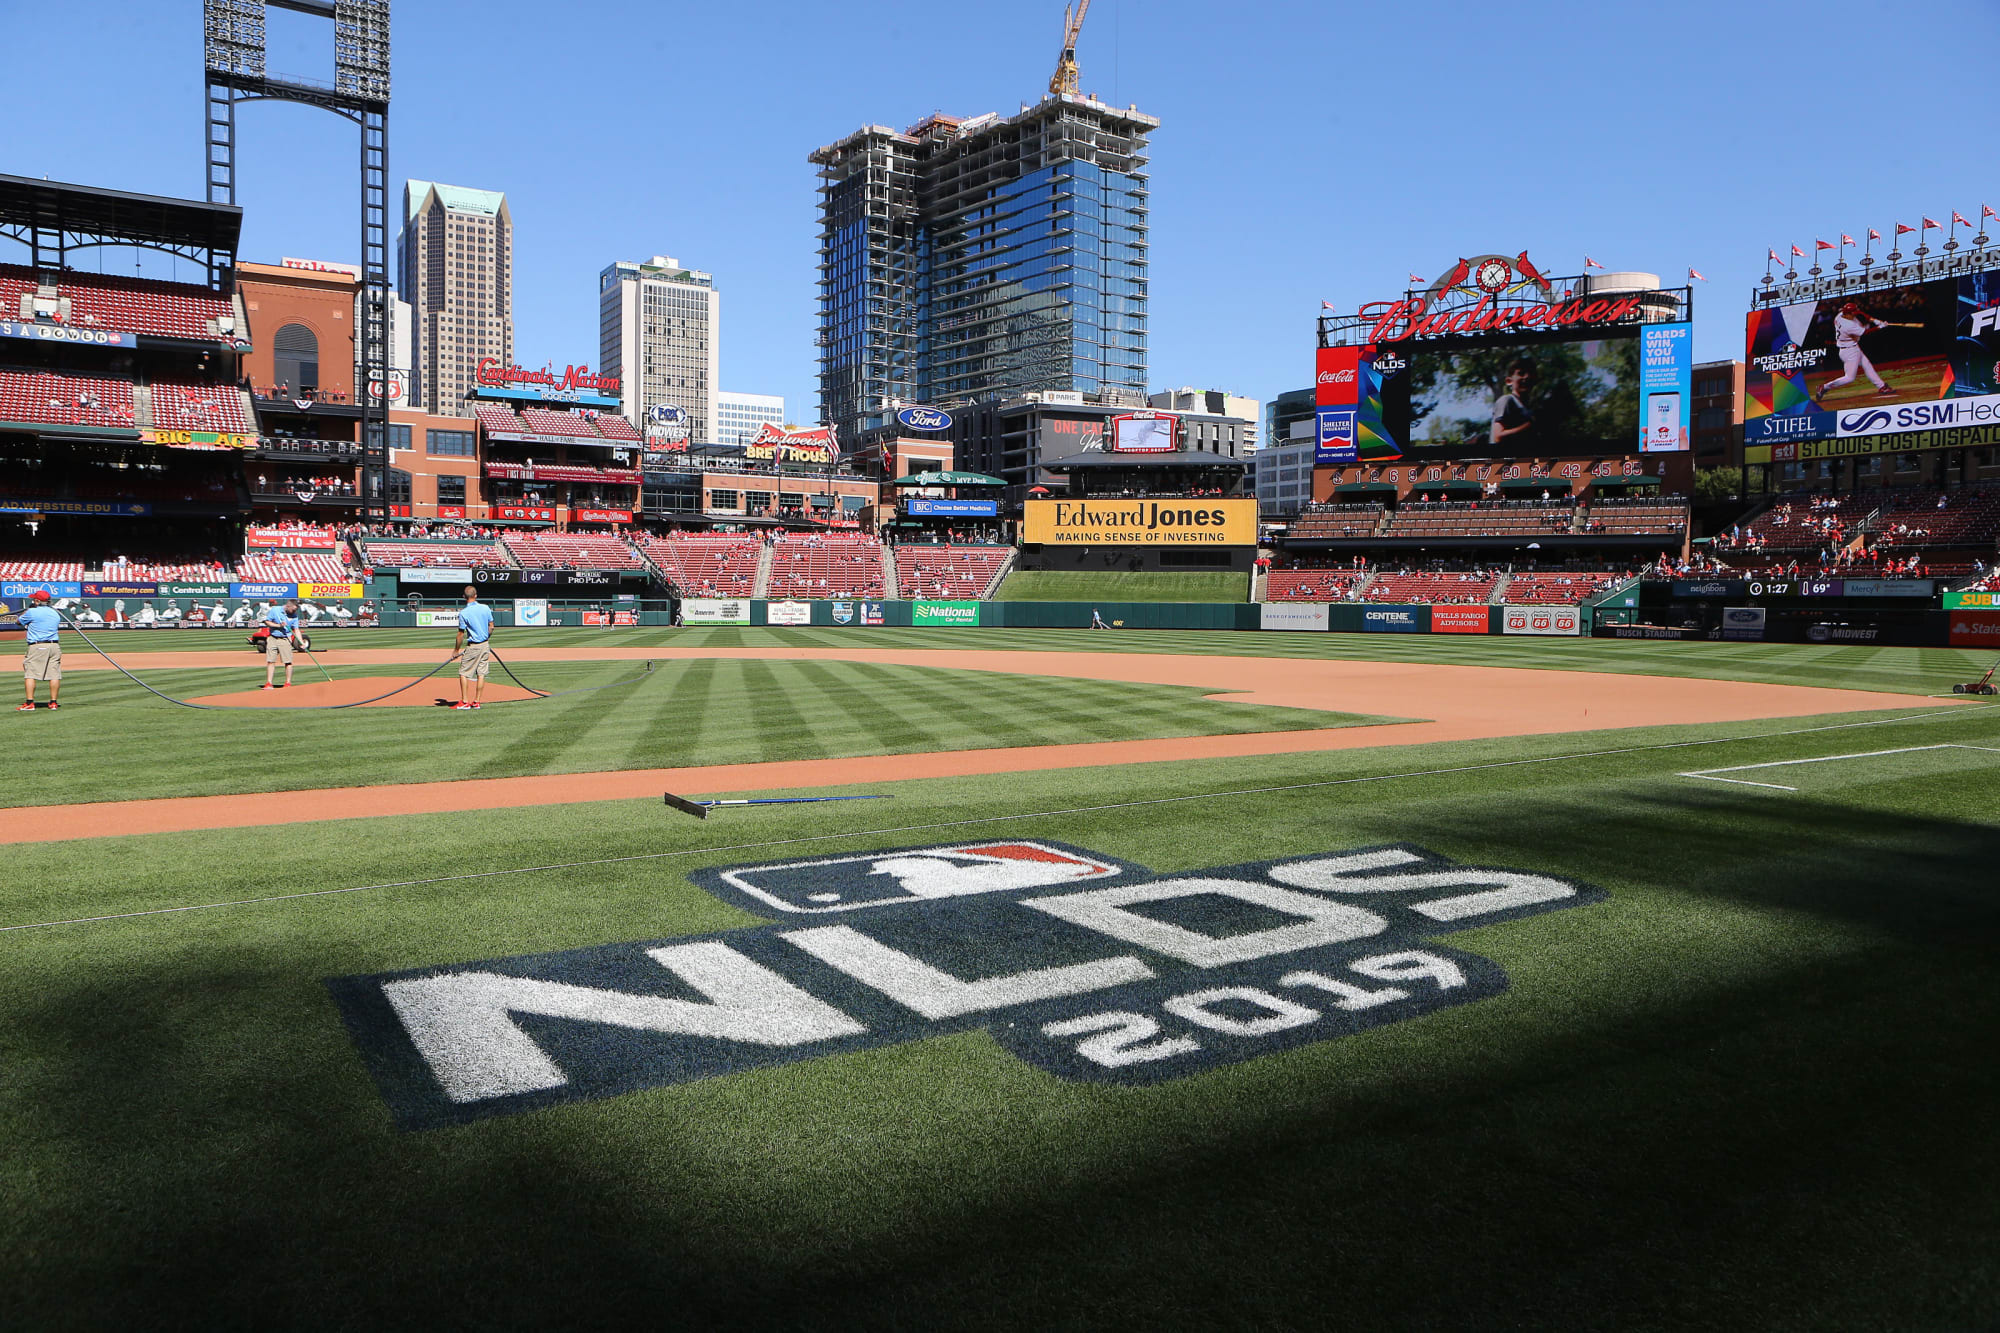 St. Louis Cardinals: The new playoff format could save the team in 2020